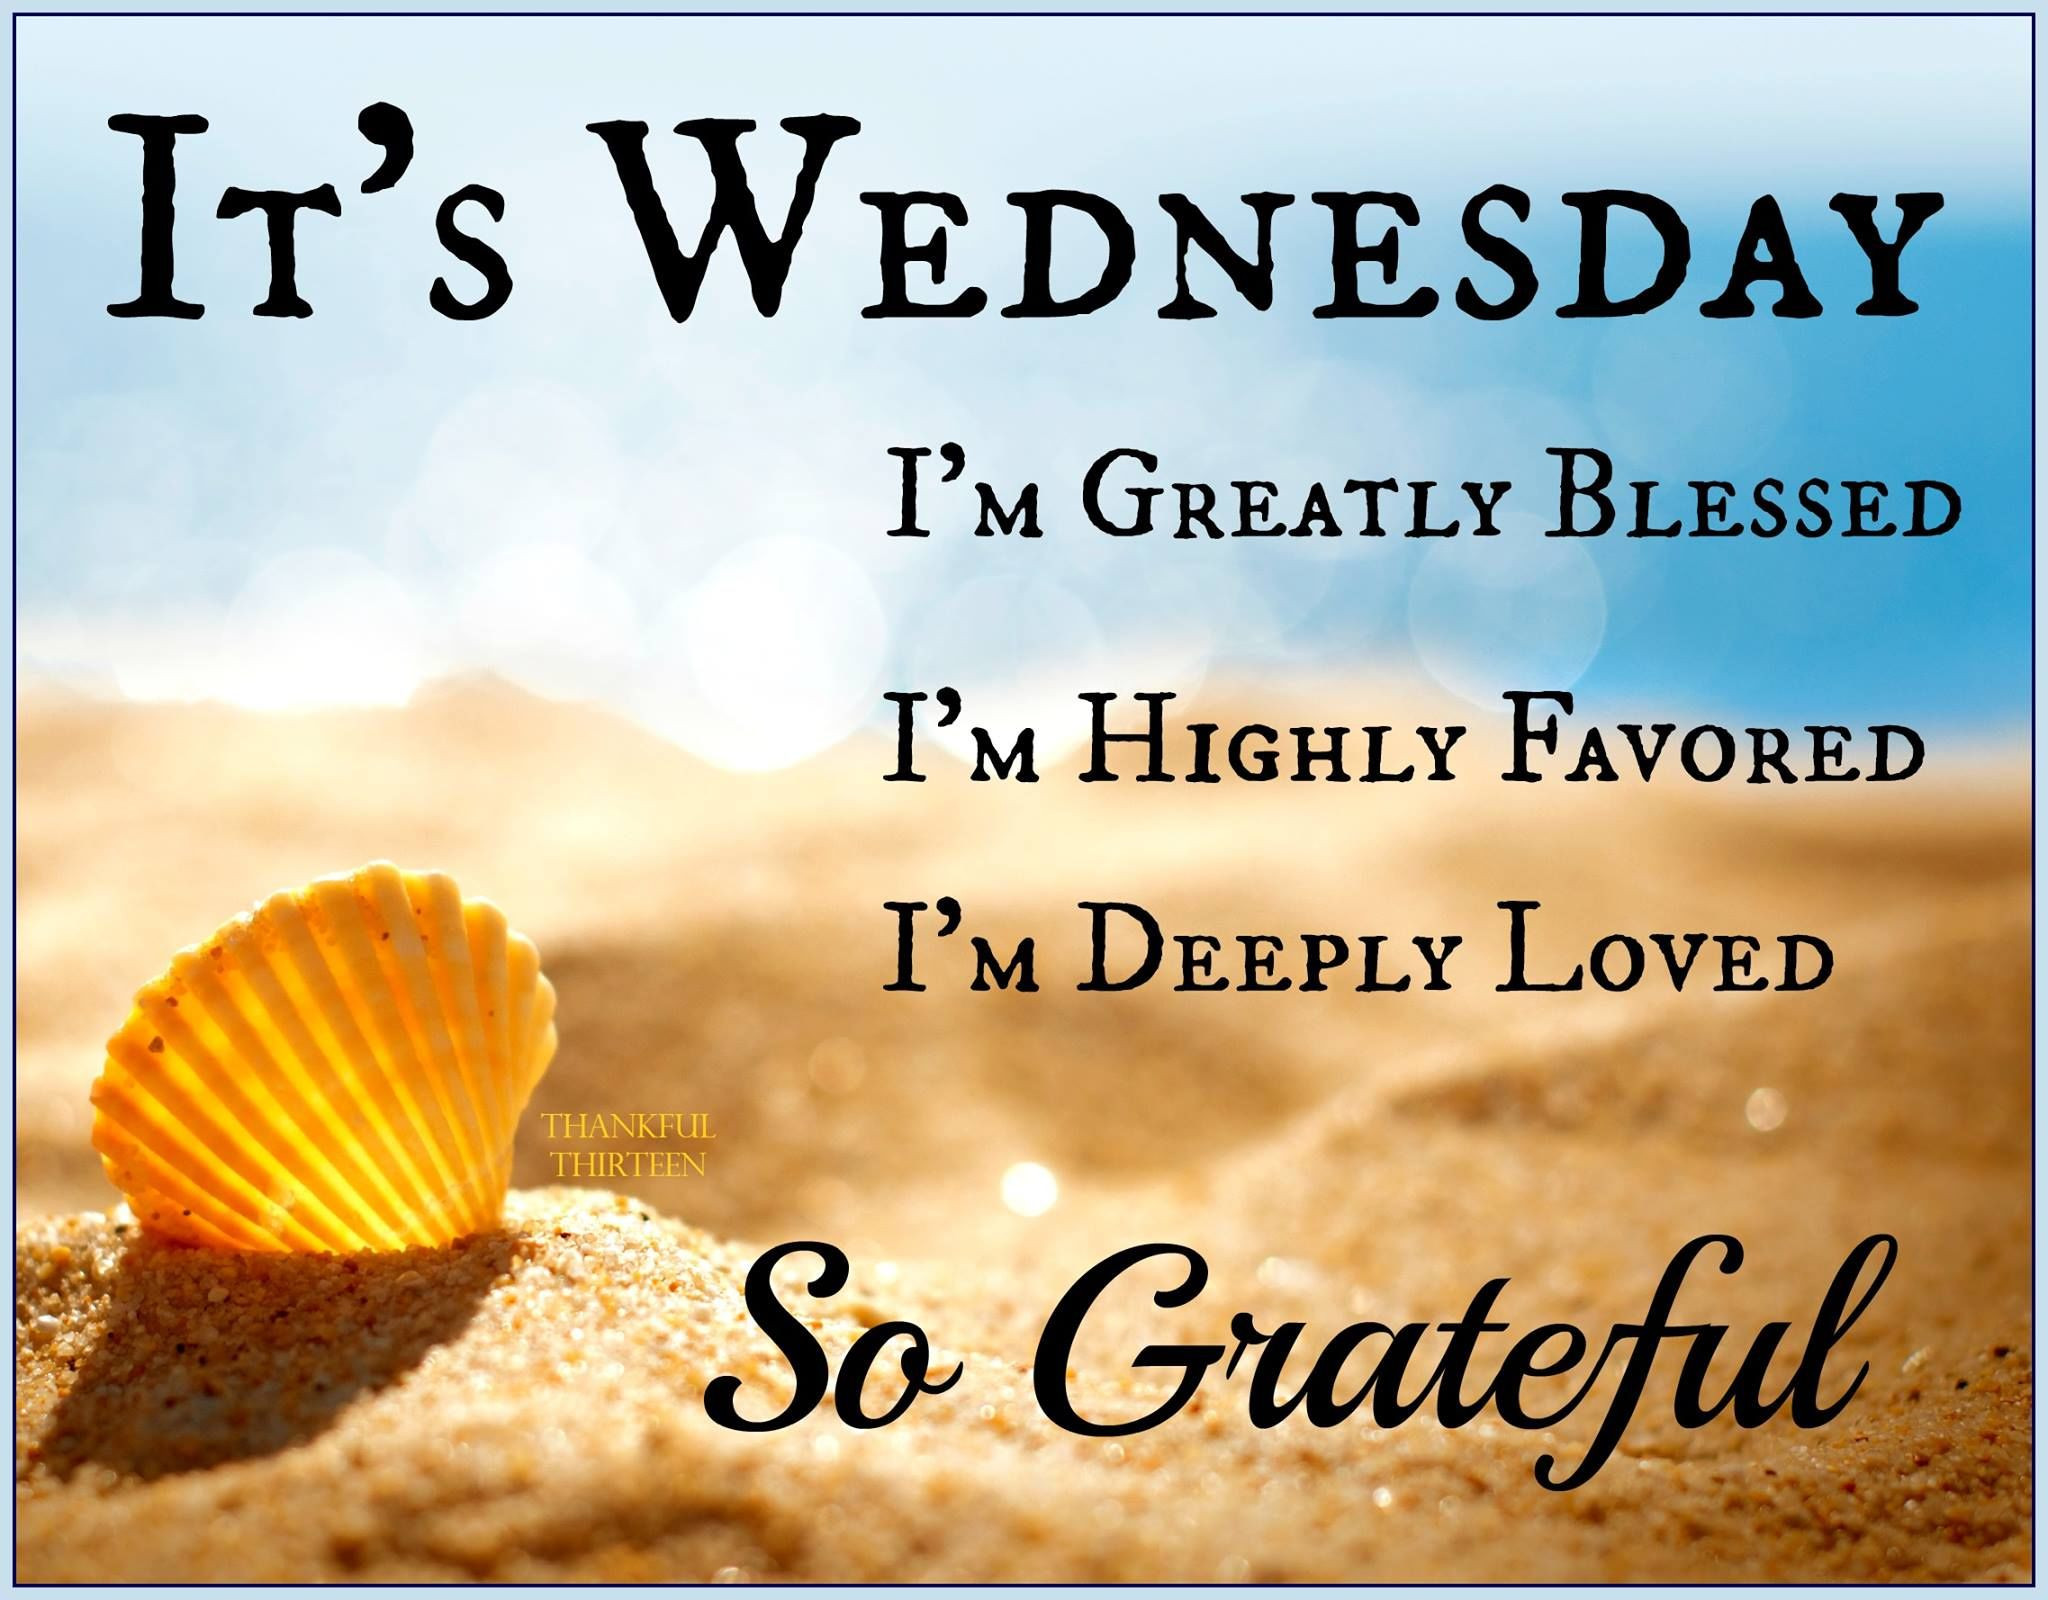 Wednesday Inspirational Quotes
 It s Wednesday I m Grateful s and